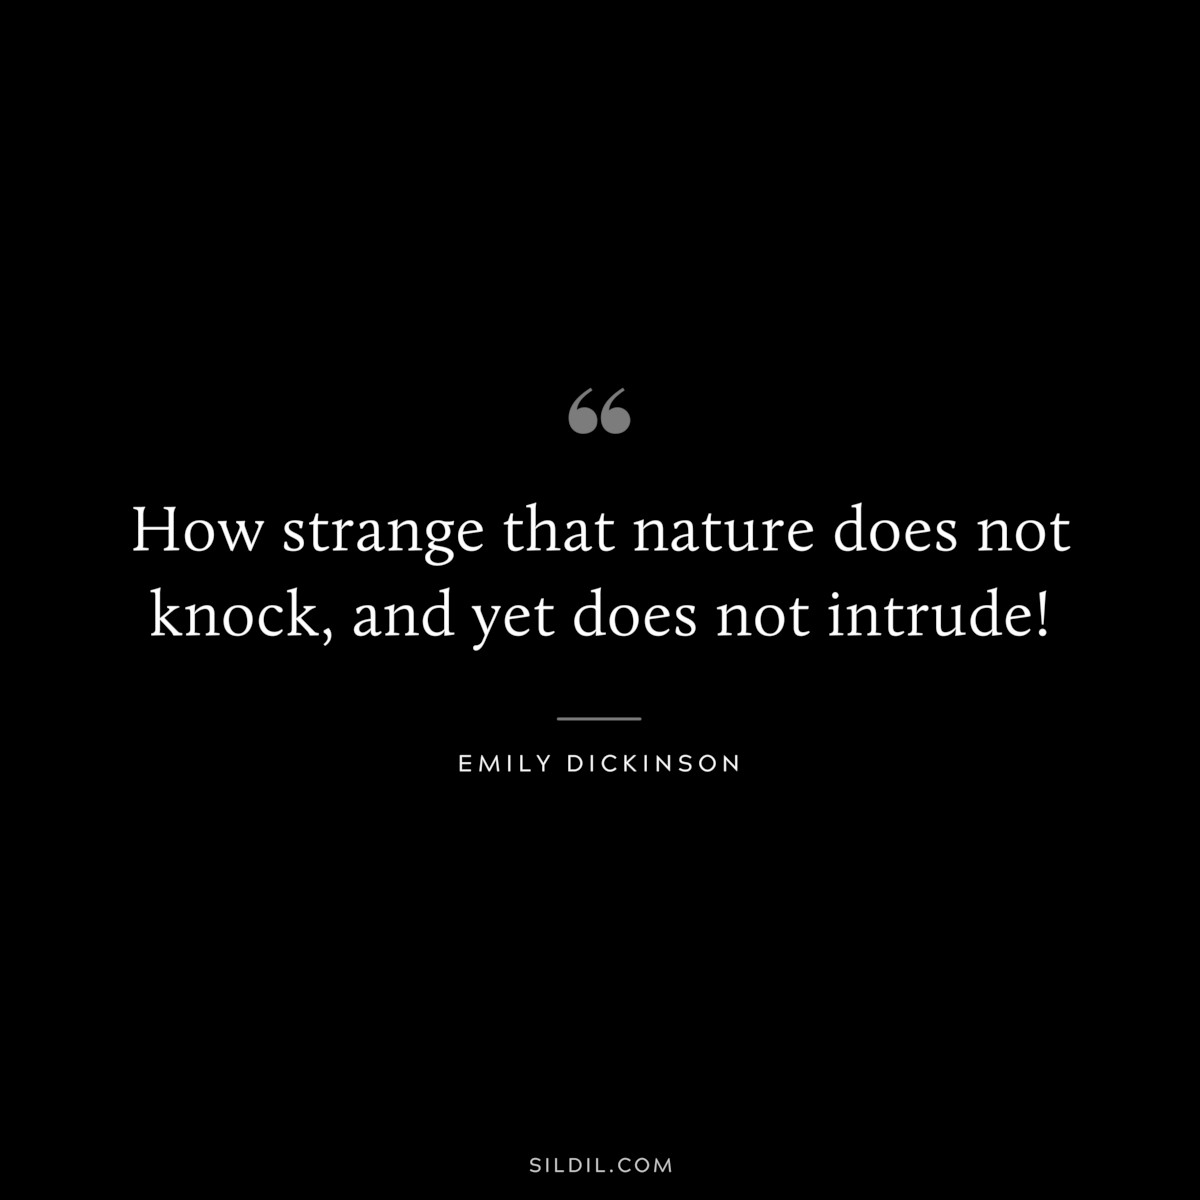 How strange that nature does not knock, and yet does not intrude!